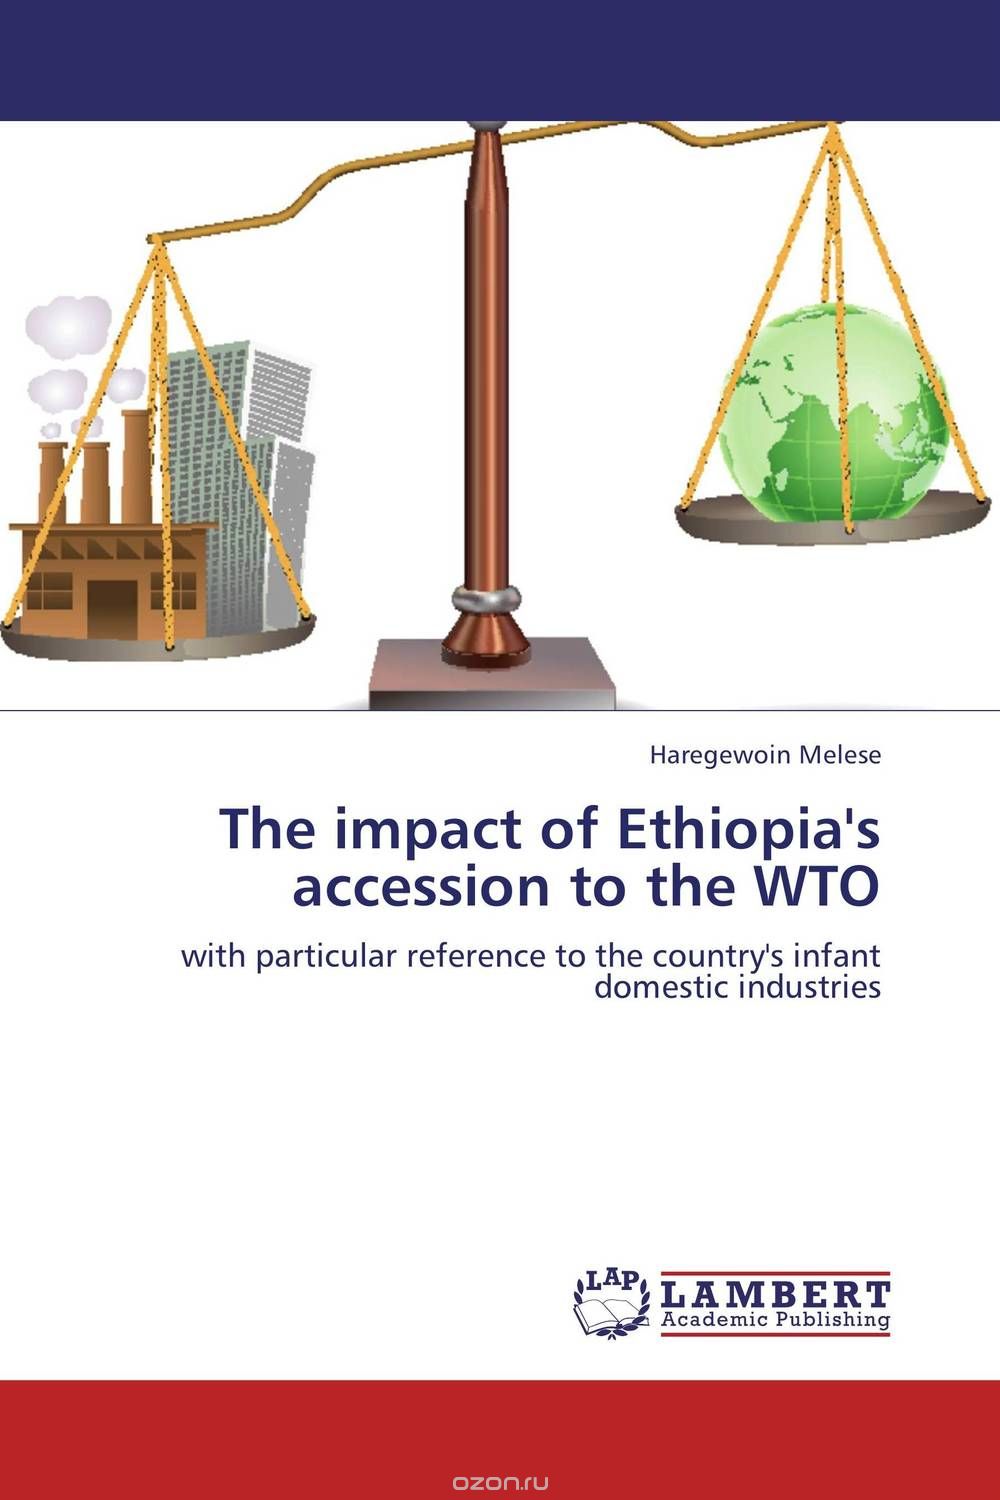 The impact of Ethiopia's accession to the WTO